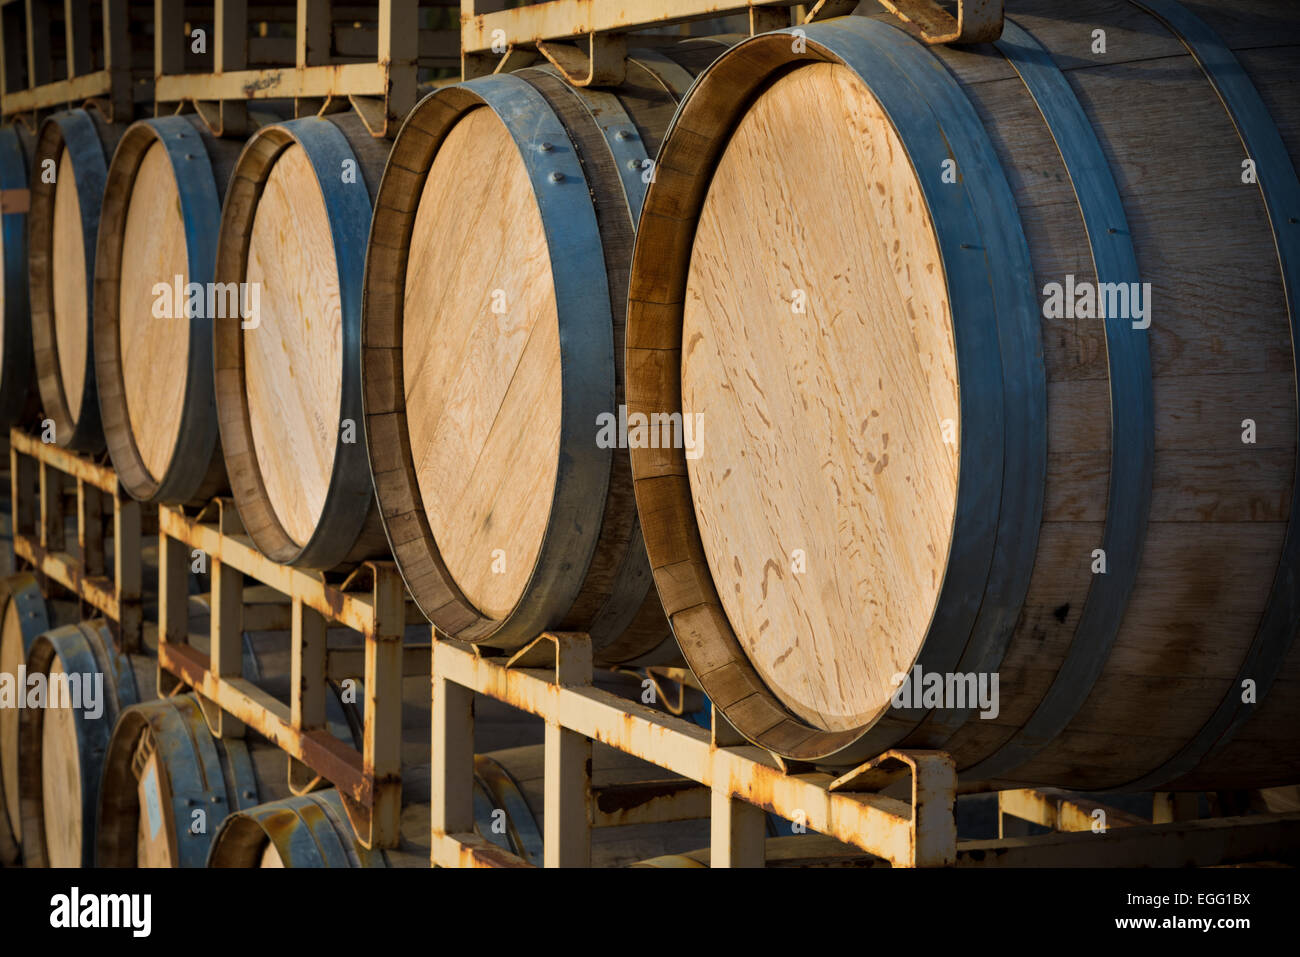 A stack of wine barrels at a vineyard Stock Photo